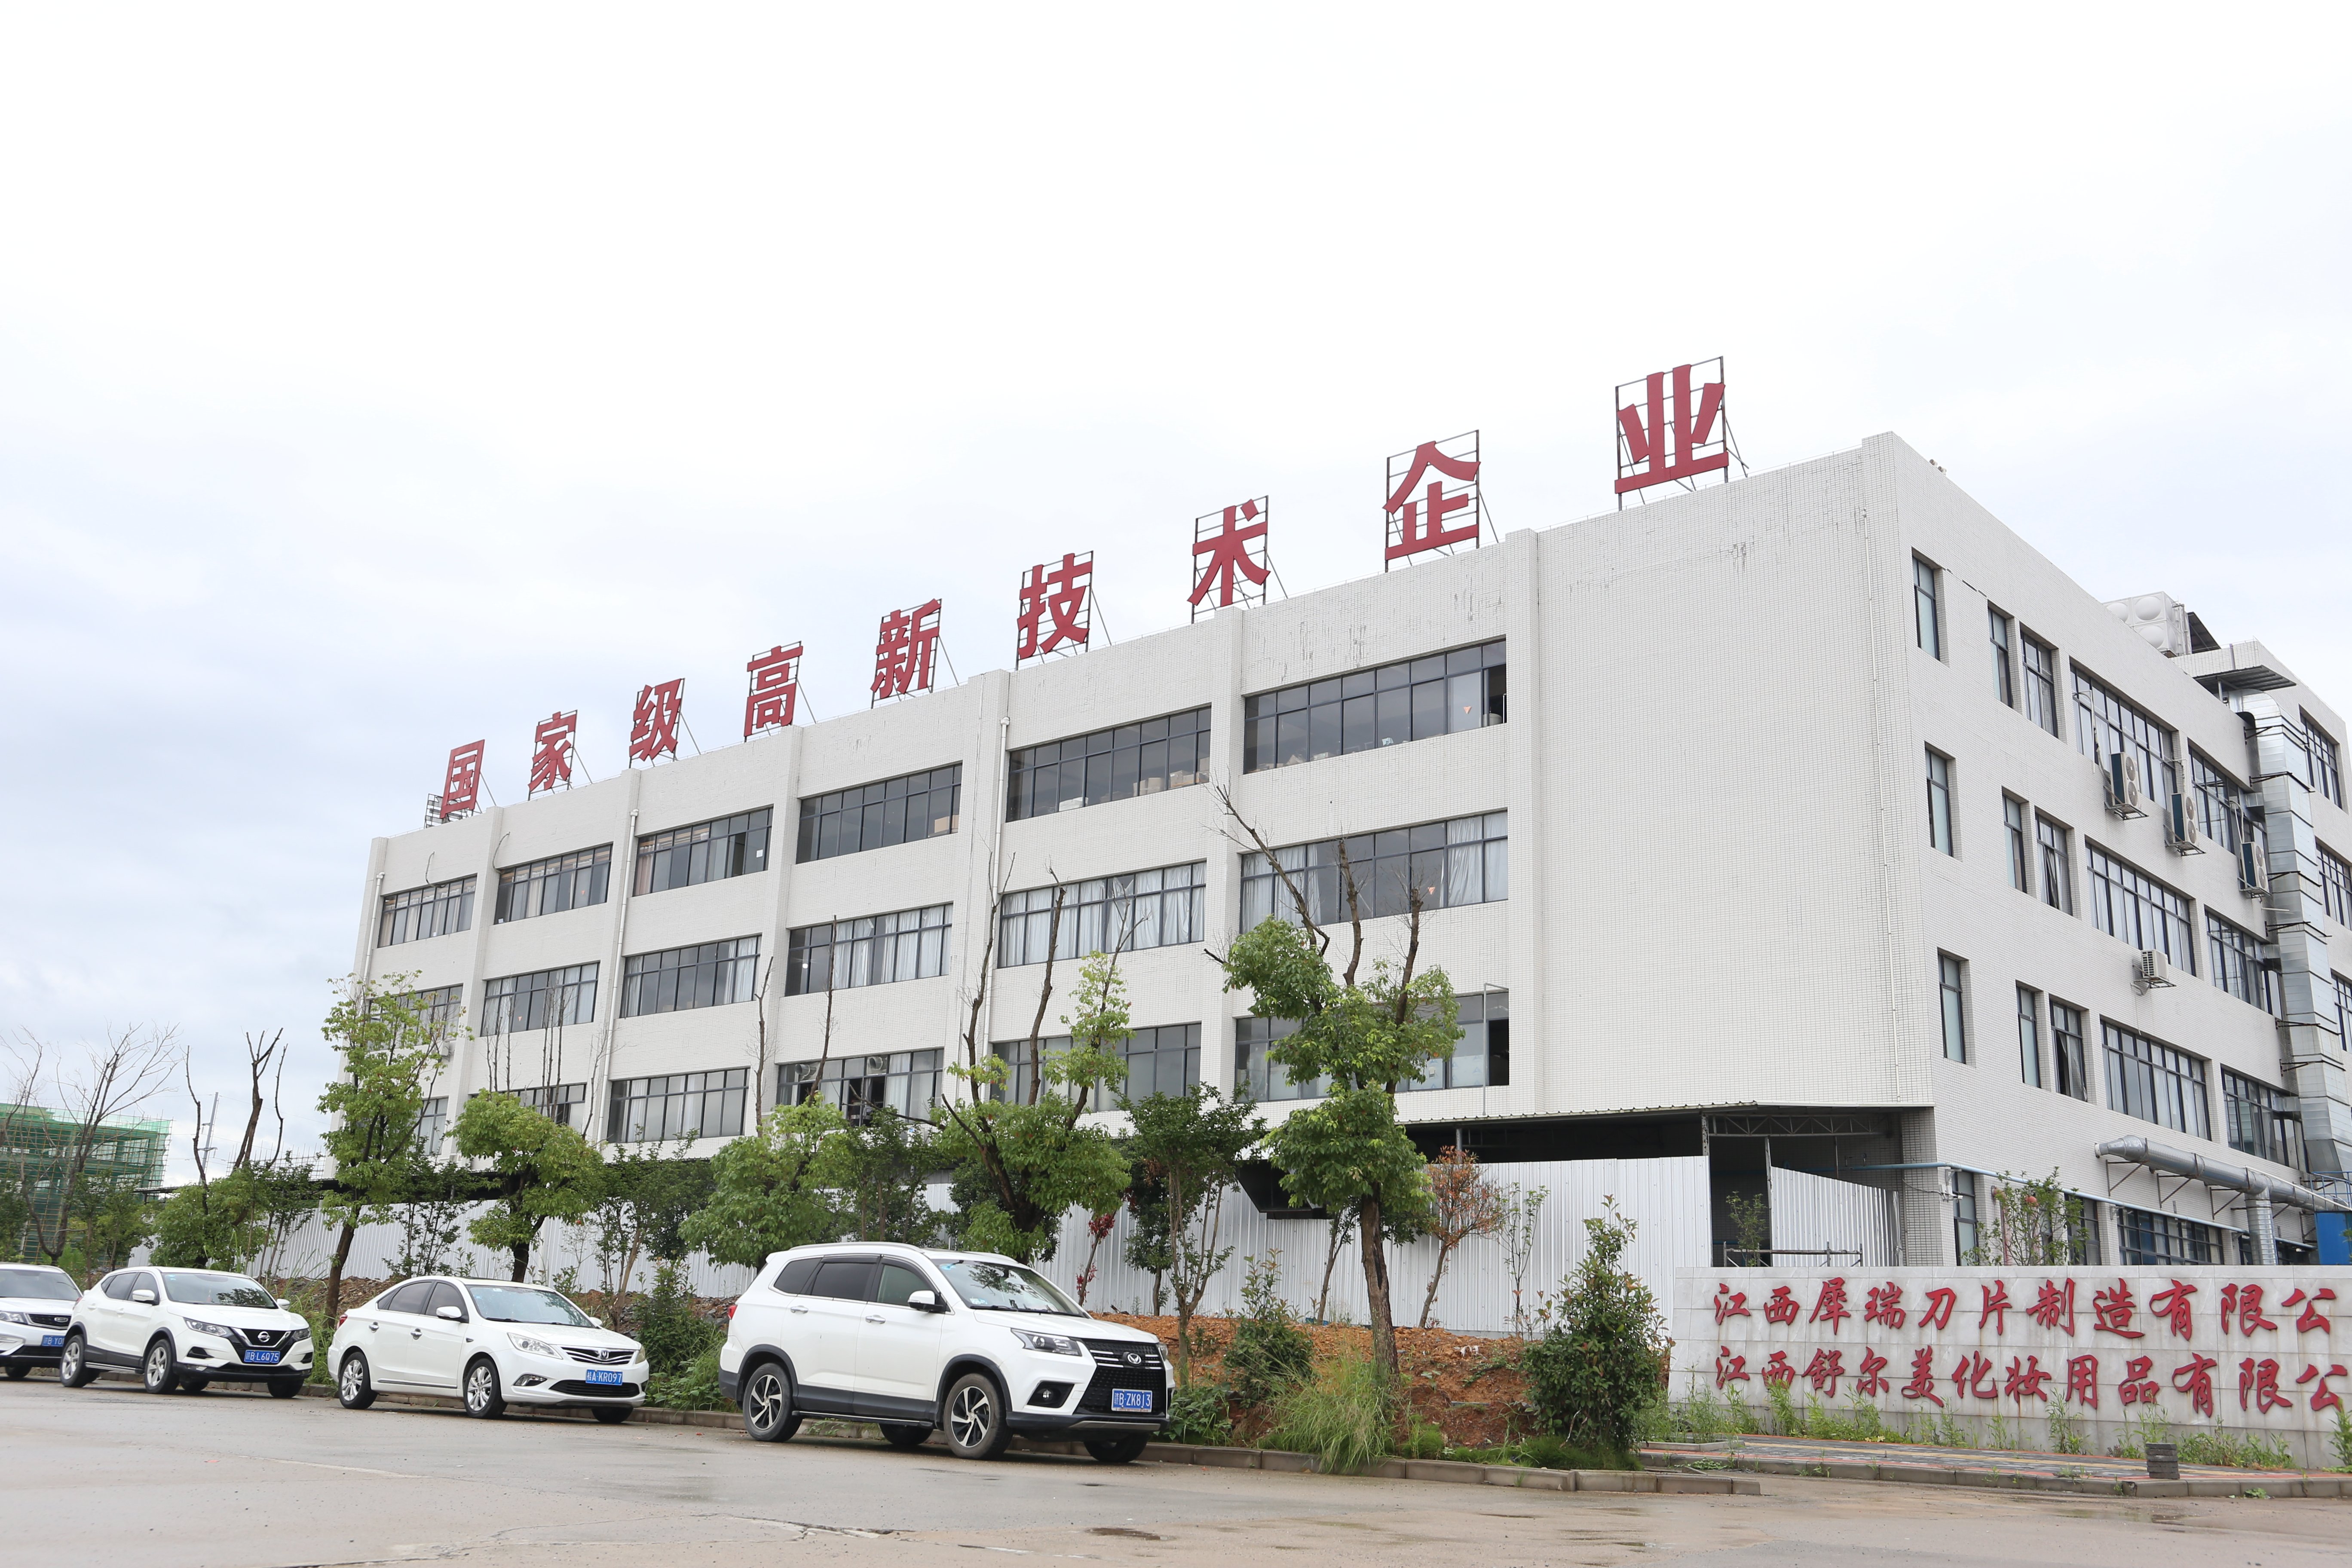 The industry picture of Xirui Blade Manufacturing Factory